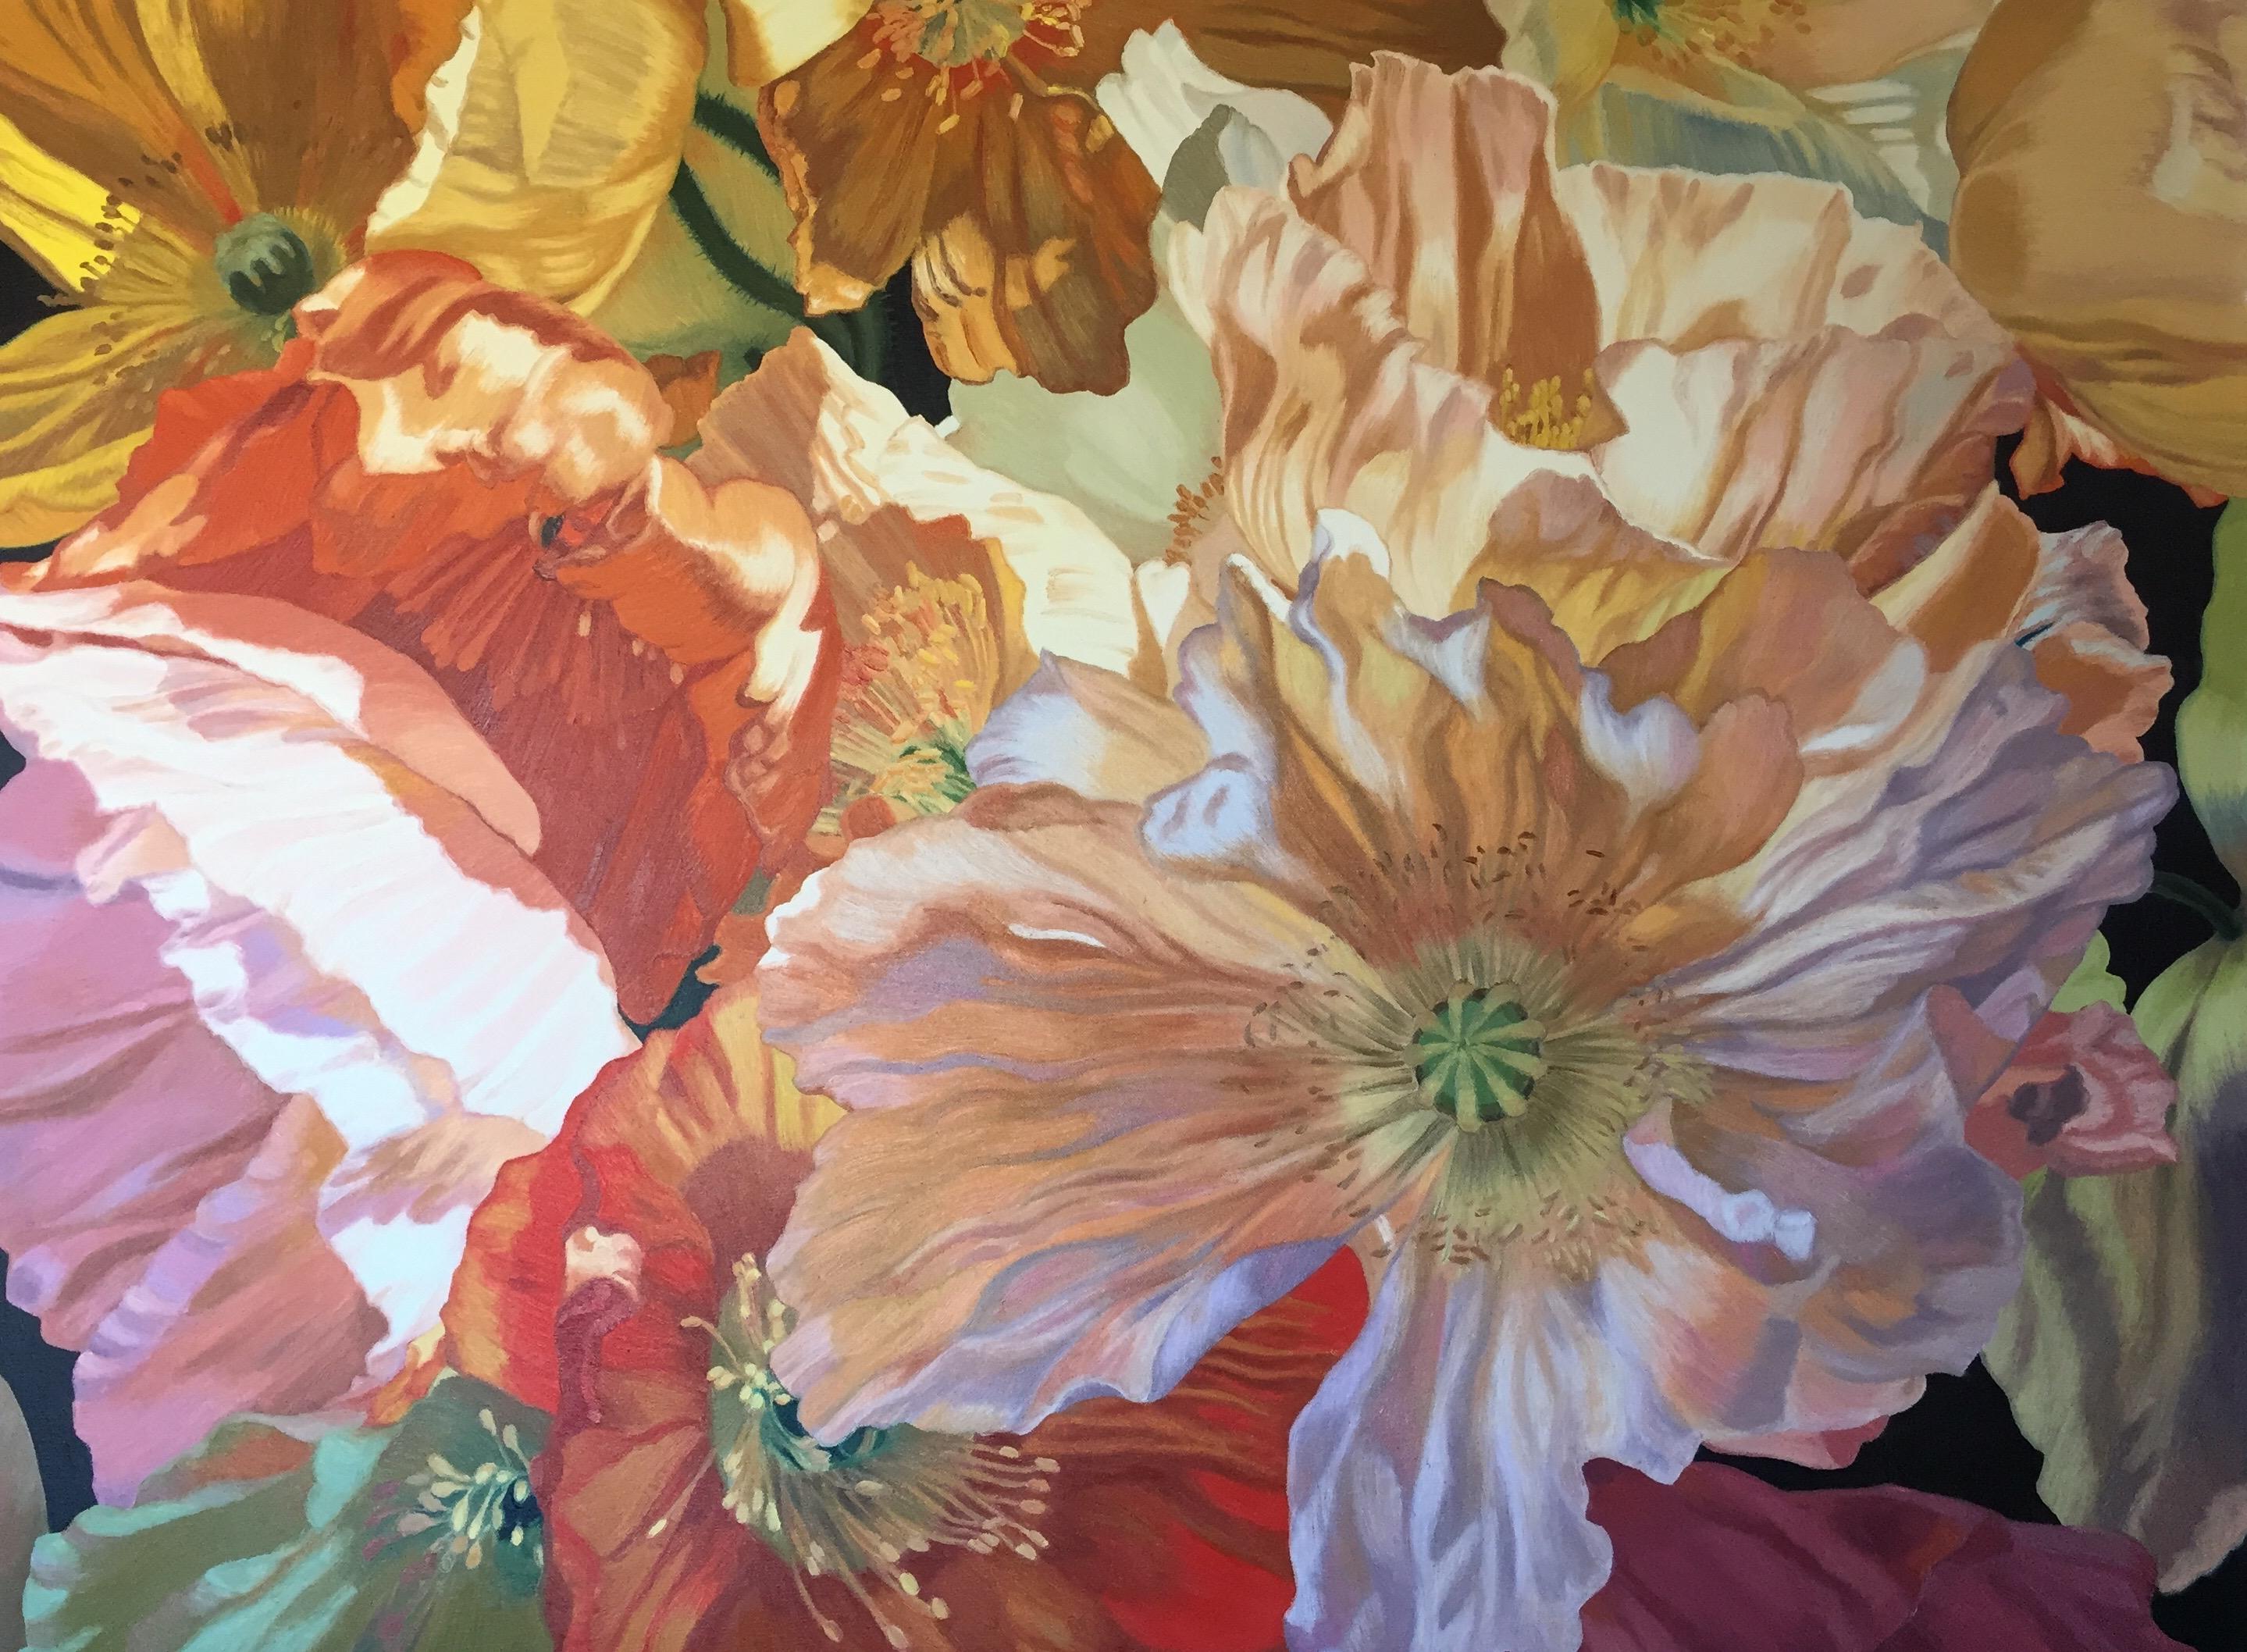 Salt Spring Poppies (floral painting, realist, flowers, oil painting, canvas) - Painting by Chloe Hedden